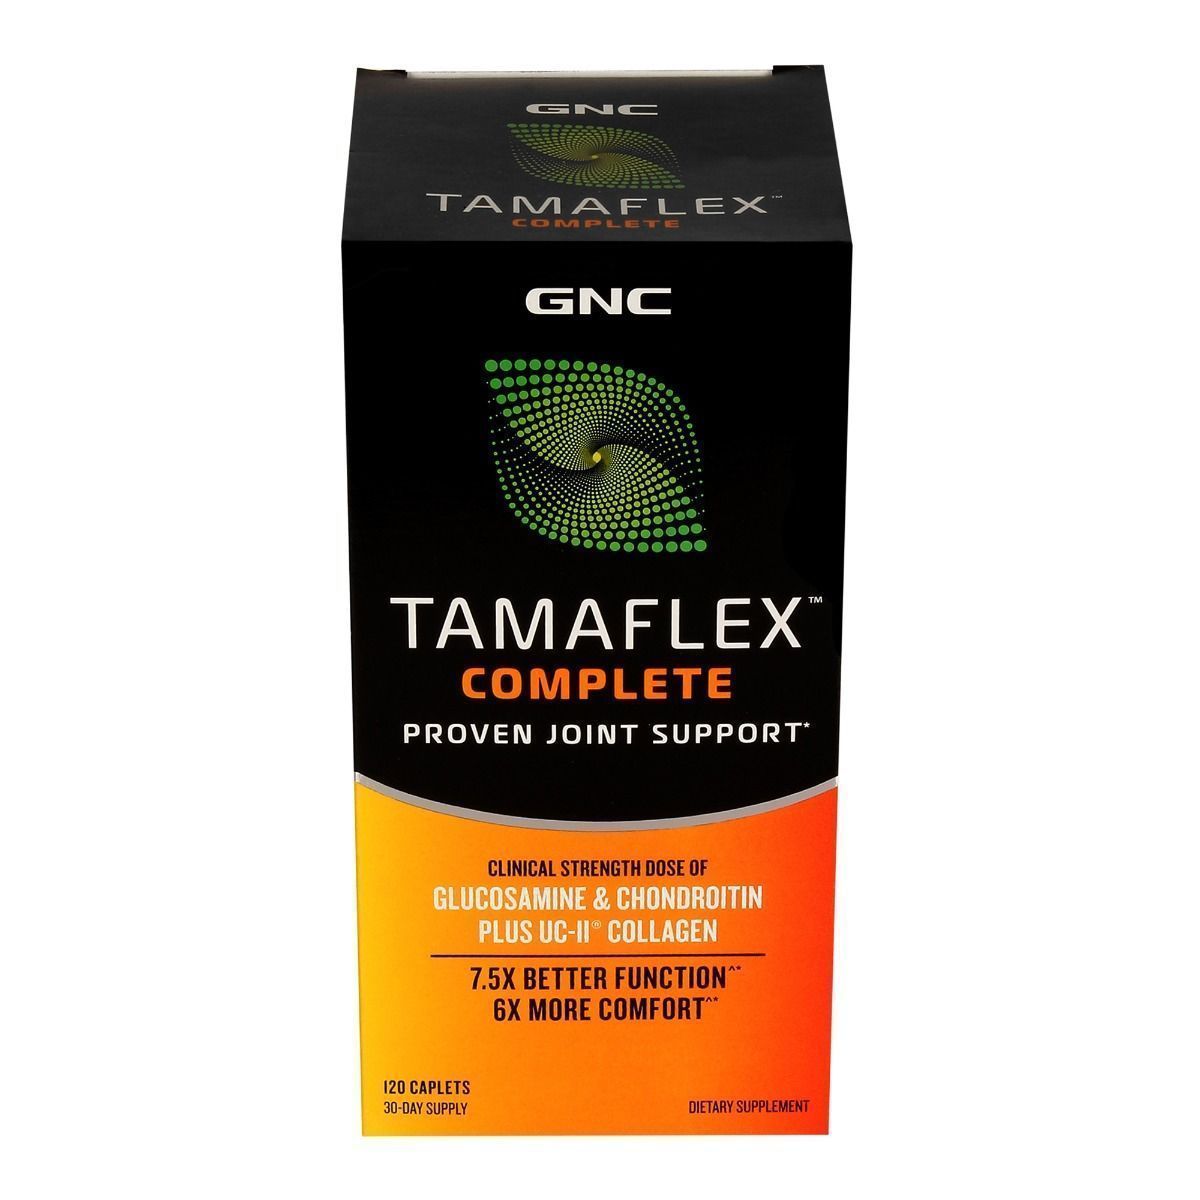 GNC TamaFlex Complete Proven Joint Support - 7.5X Better Joint Functions & 6X More Comfort